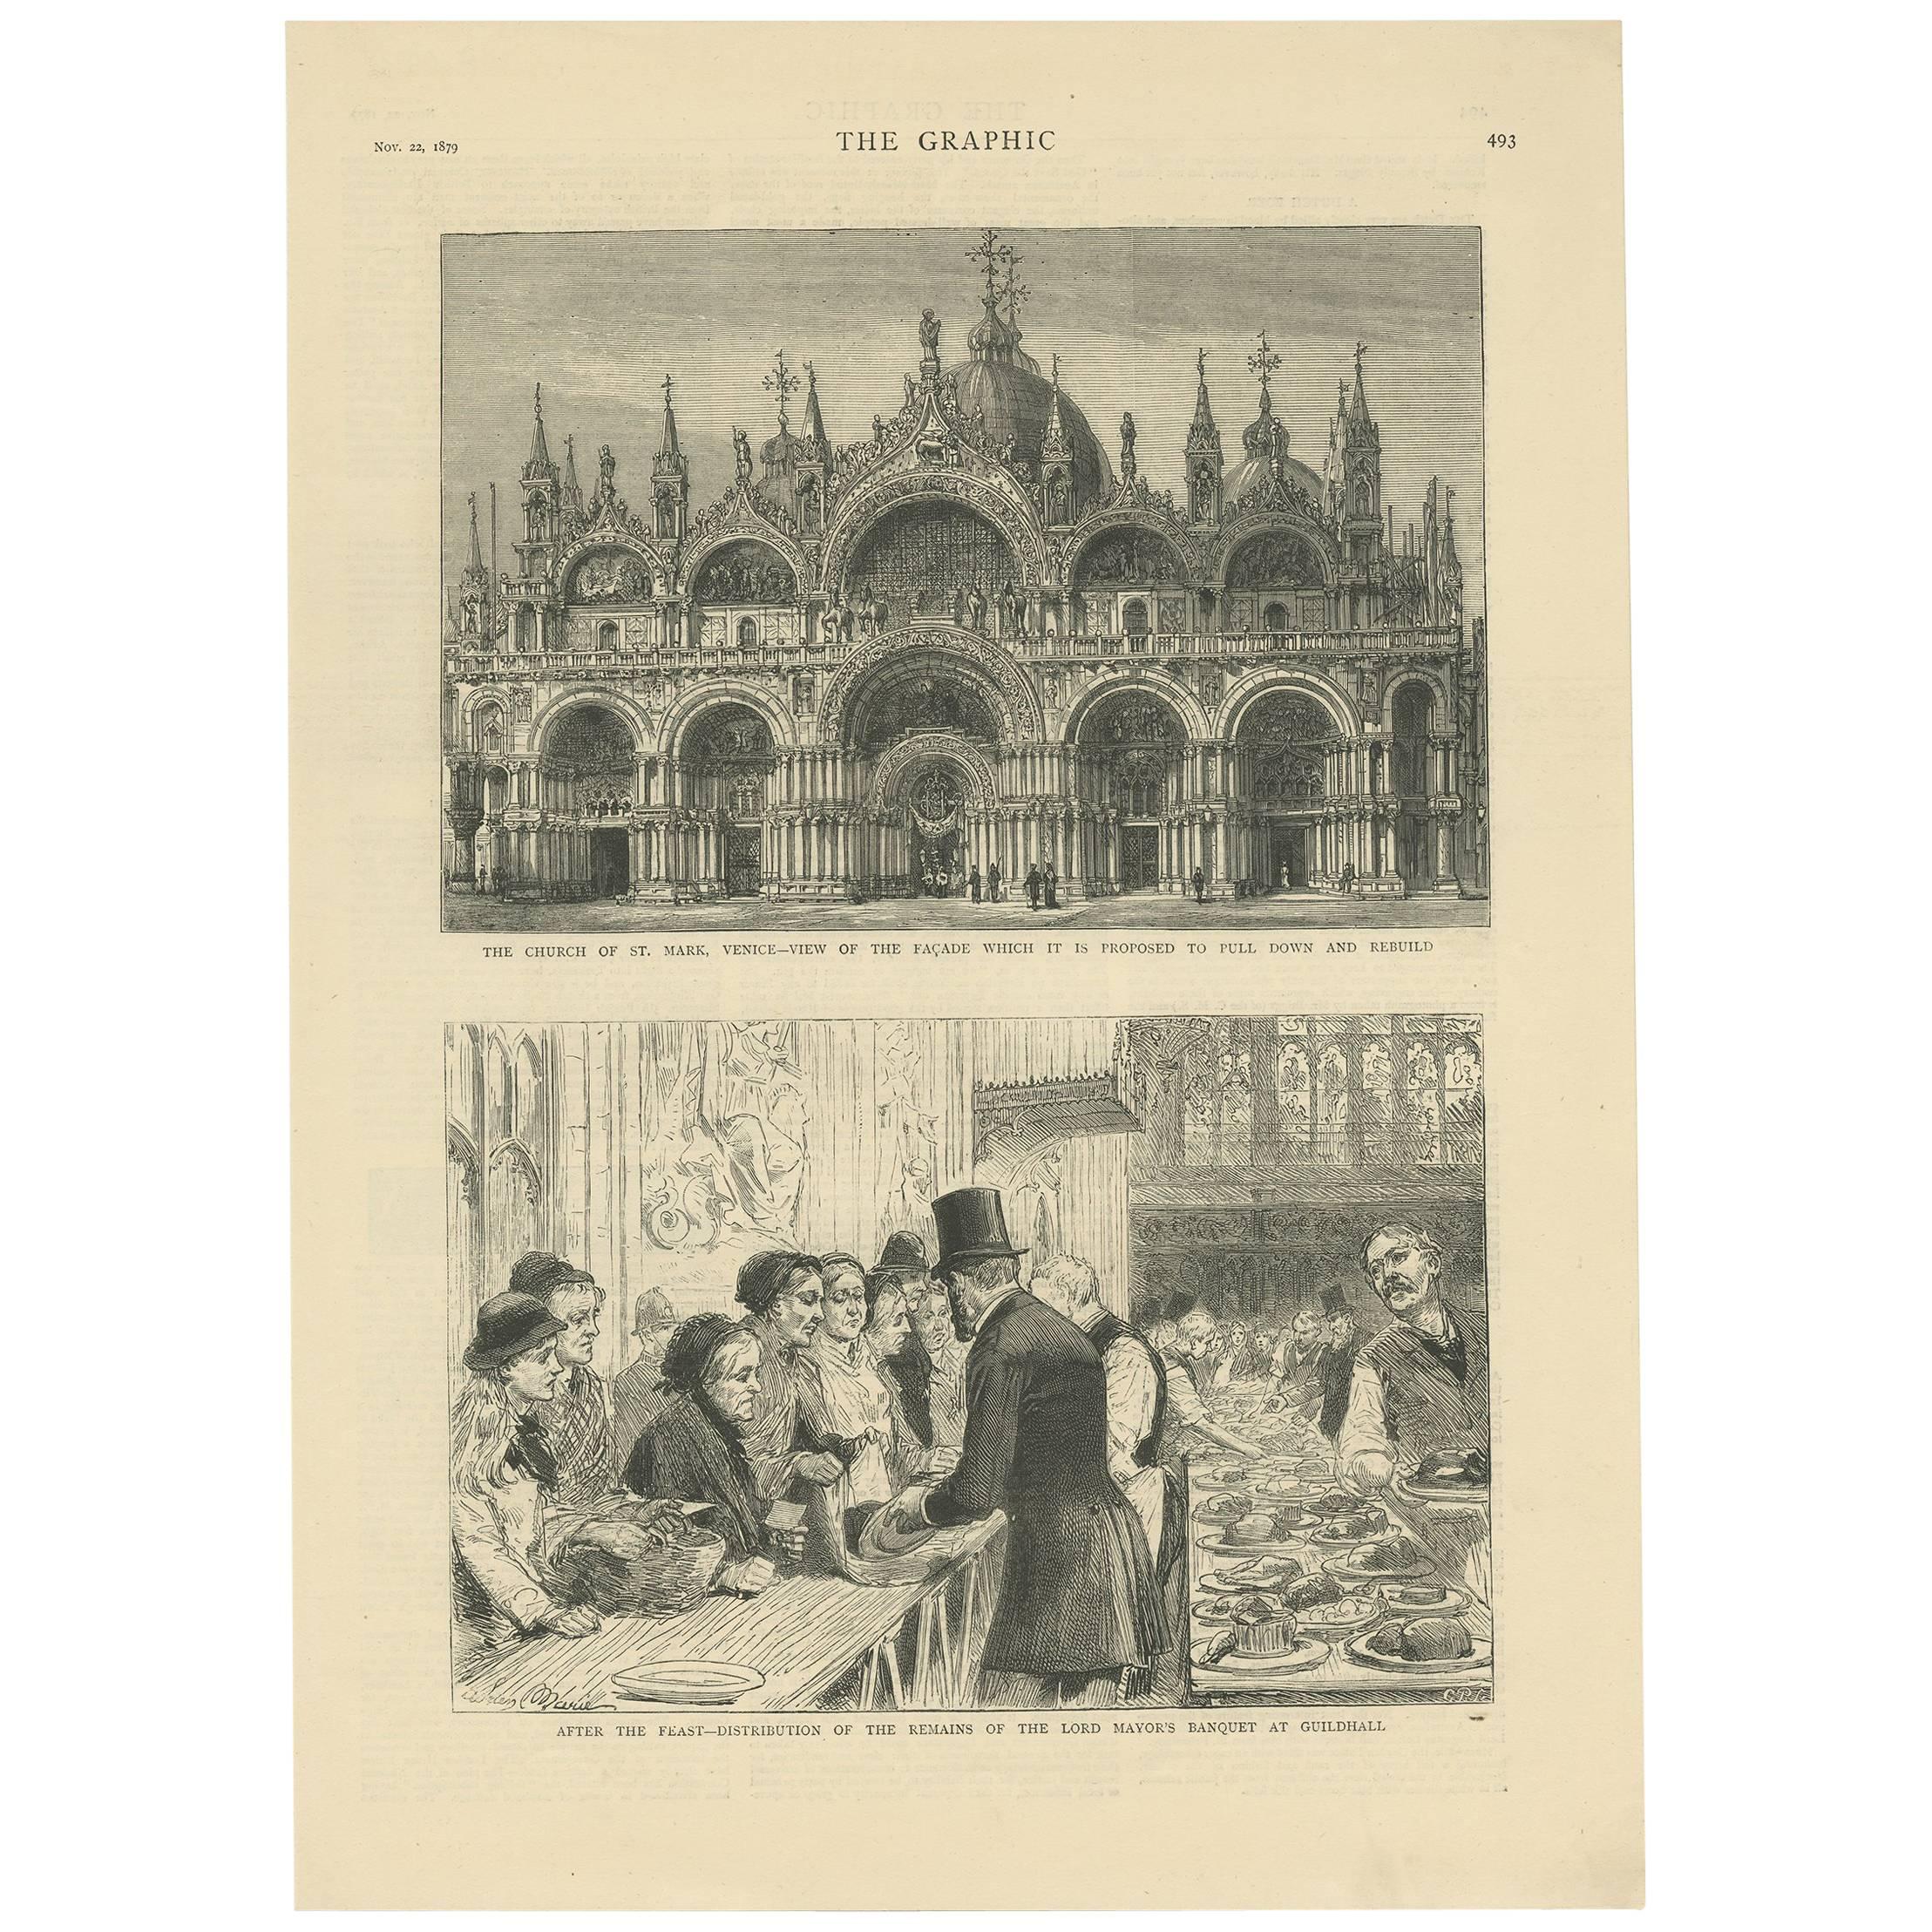 Antique Print of the Church of St. Mark 'Venice' and Lord Mayor's Banquet